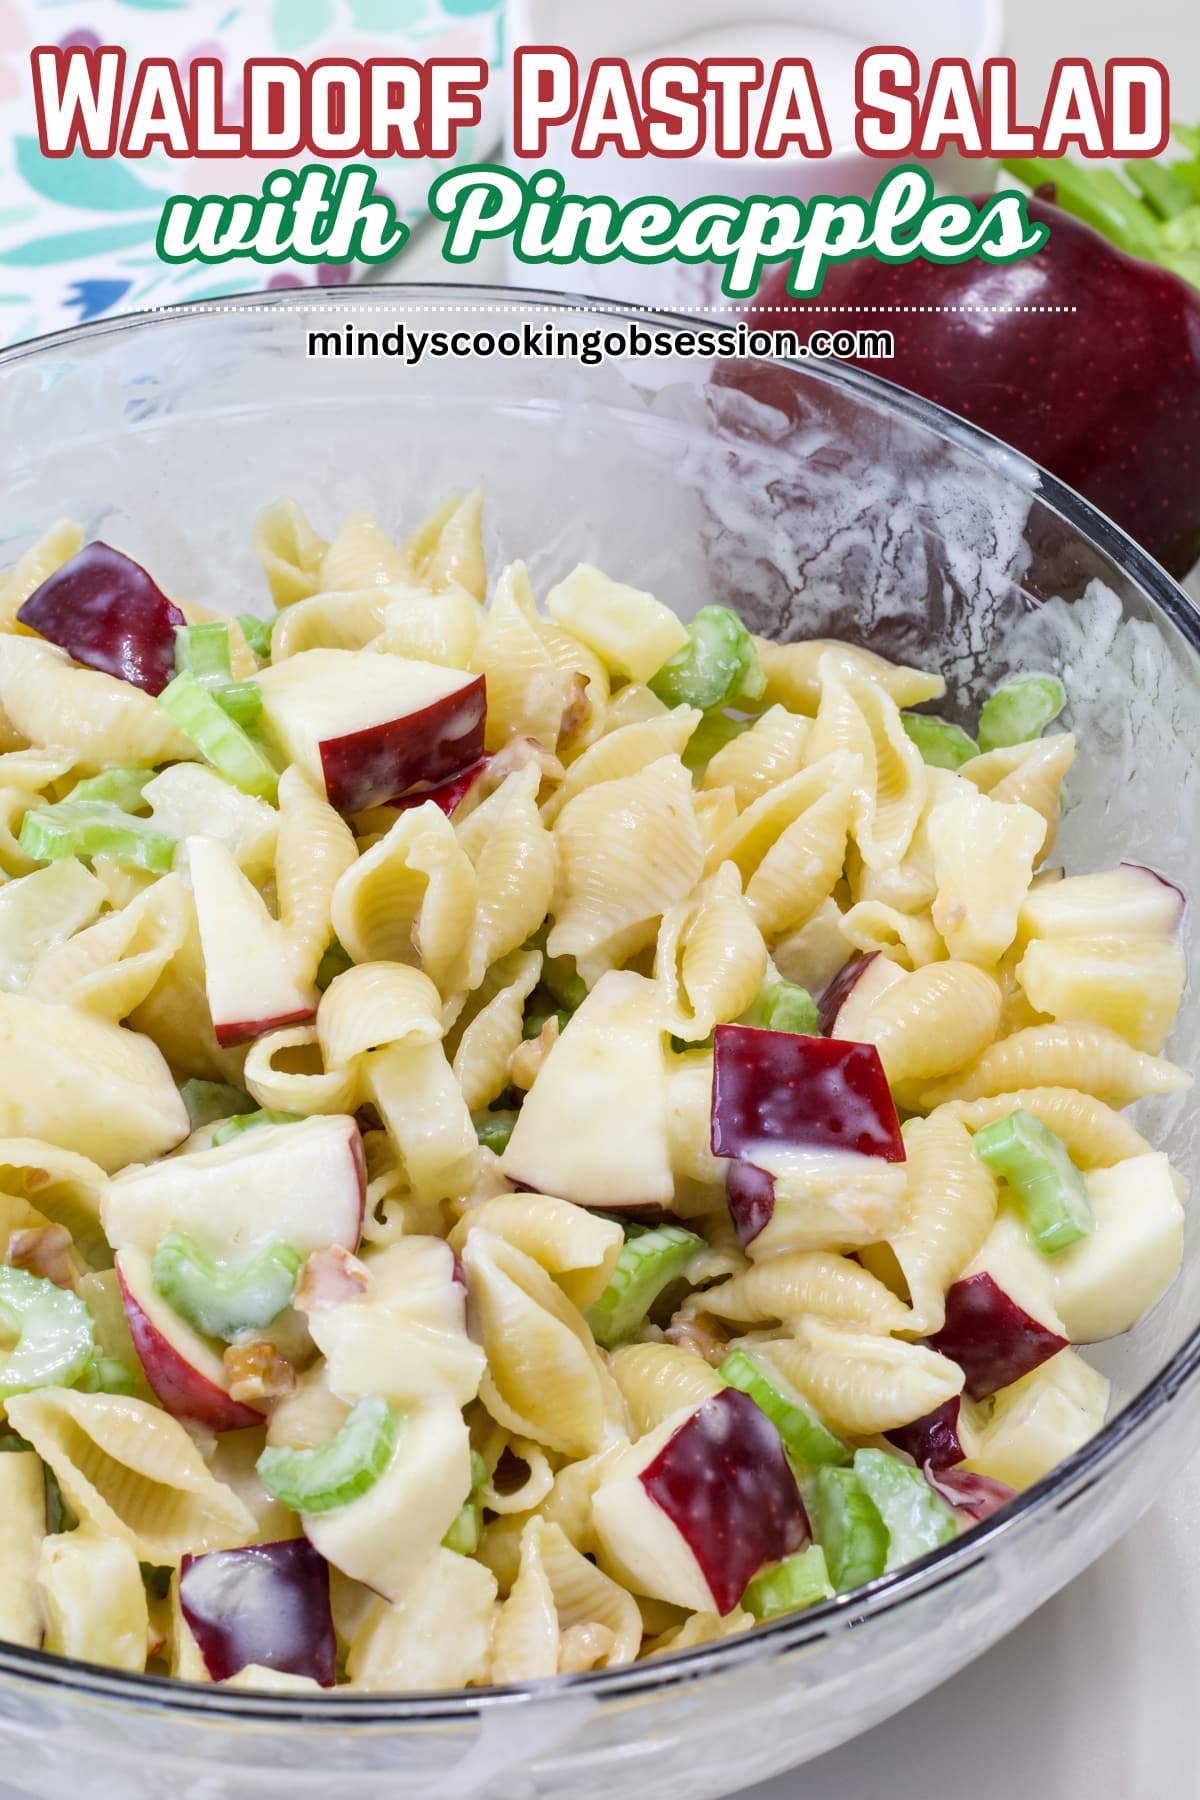 Learn how to make a flavorful Waldorf pasta salad with pineapples. This modern twist on the classic salad is perfect for a light meal or appetizer. via @mindyscookingobsession